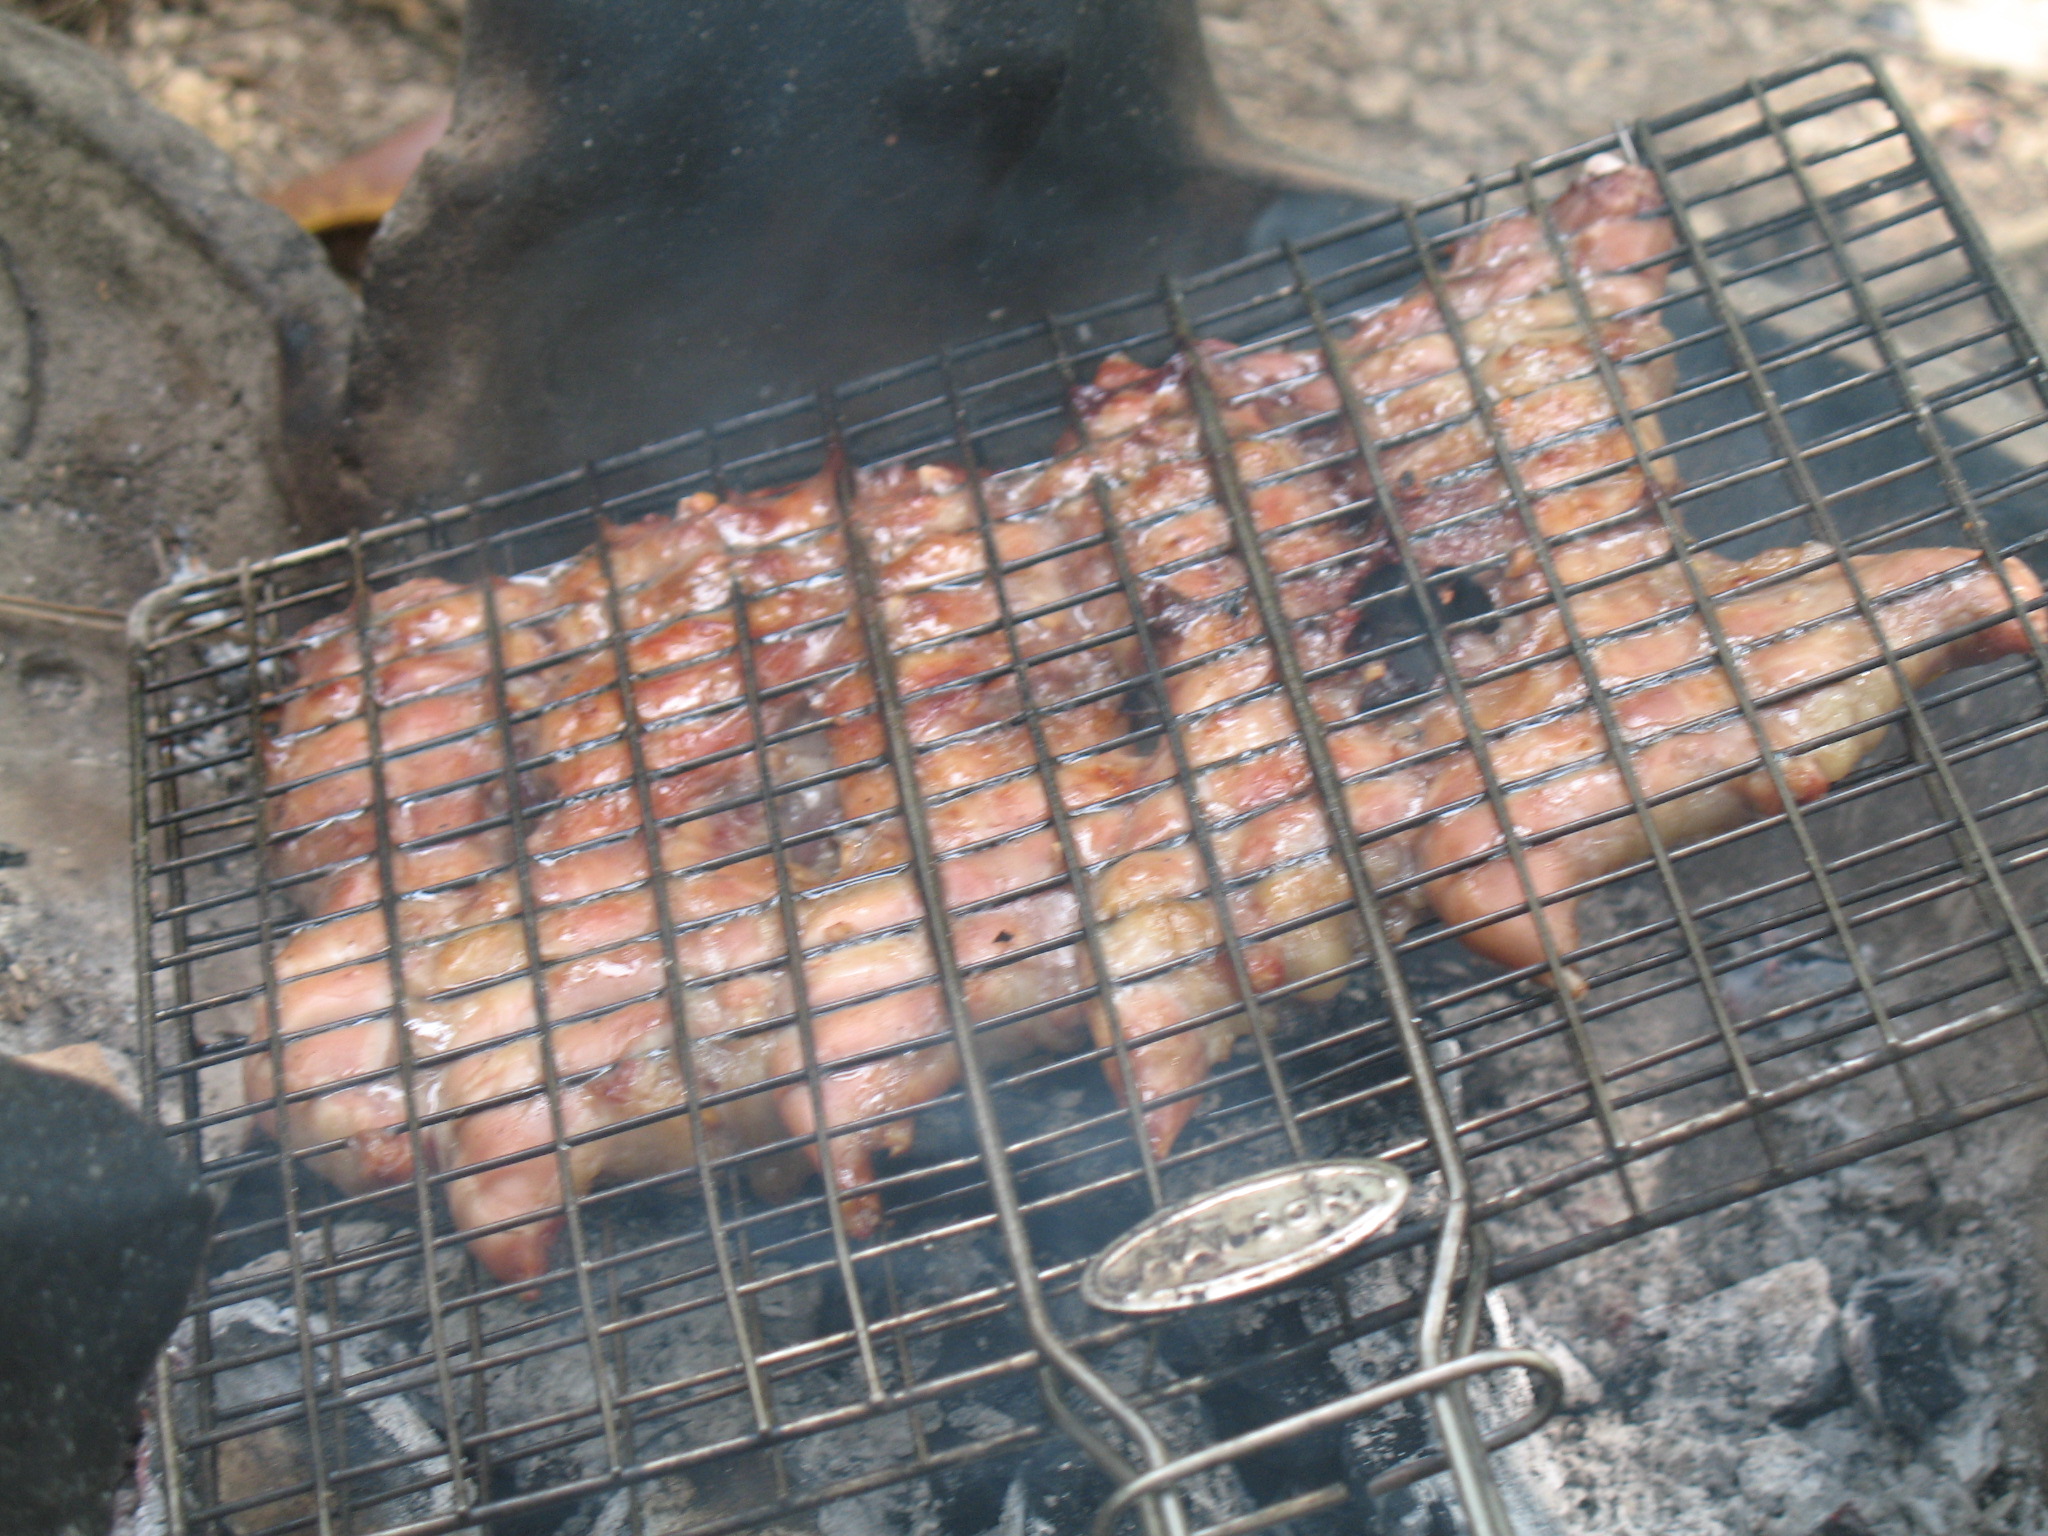 Rats are grilled in the Mekong Delta, southern Vietnam. Photo: Viet Toan/Tuoi Tre News